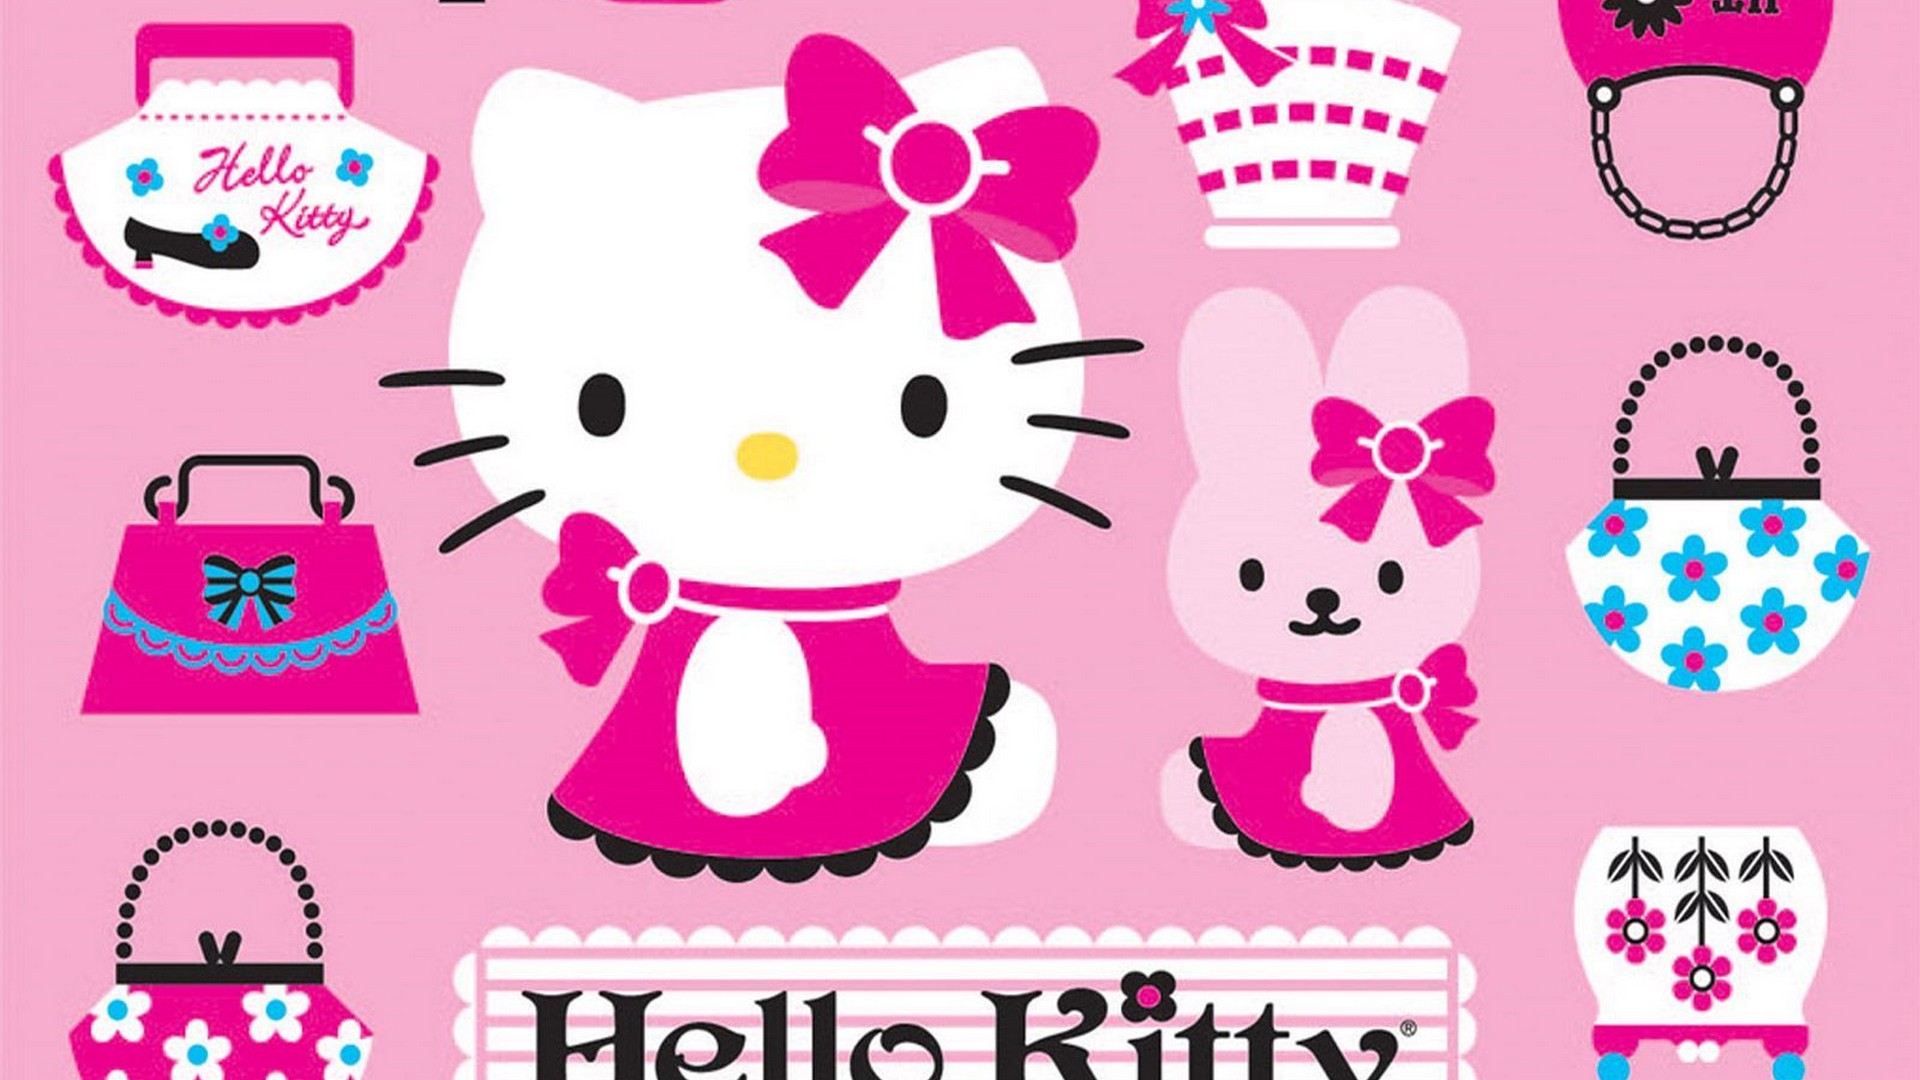 Wallpaper HD Sanrio Hello Kitty With Resolution 1920X1080 pixel. You can make this wallpaper for your Desktop Computer Backgrounds, Mac Wallpapers, Android Lock screen or iPhone Screensavers